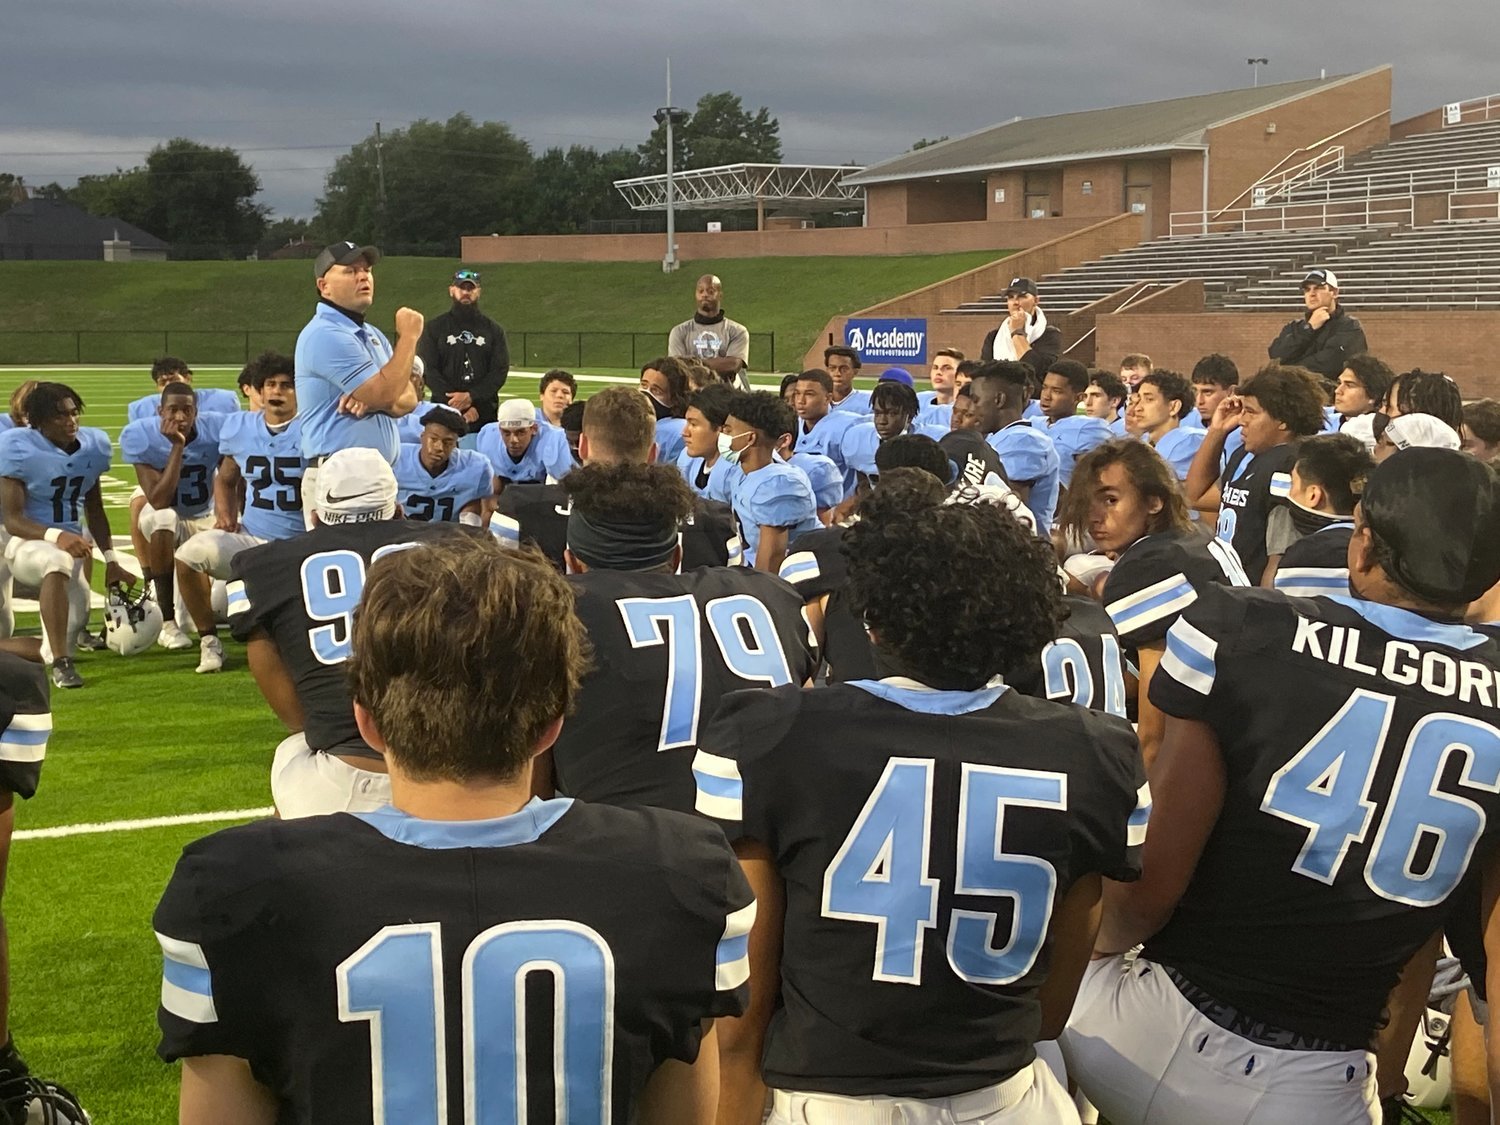 Paetow football coach BJ Gotte talks to his players after their blue-black spring football game on May 18, 2020, at Rhodes stadium. Gotte said he has one expectation for his players at all times – to do their best on and off the field.